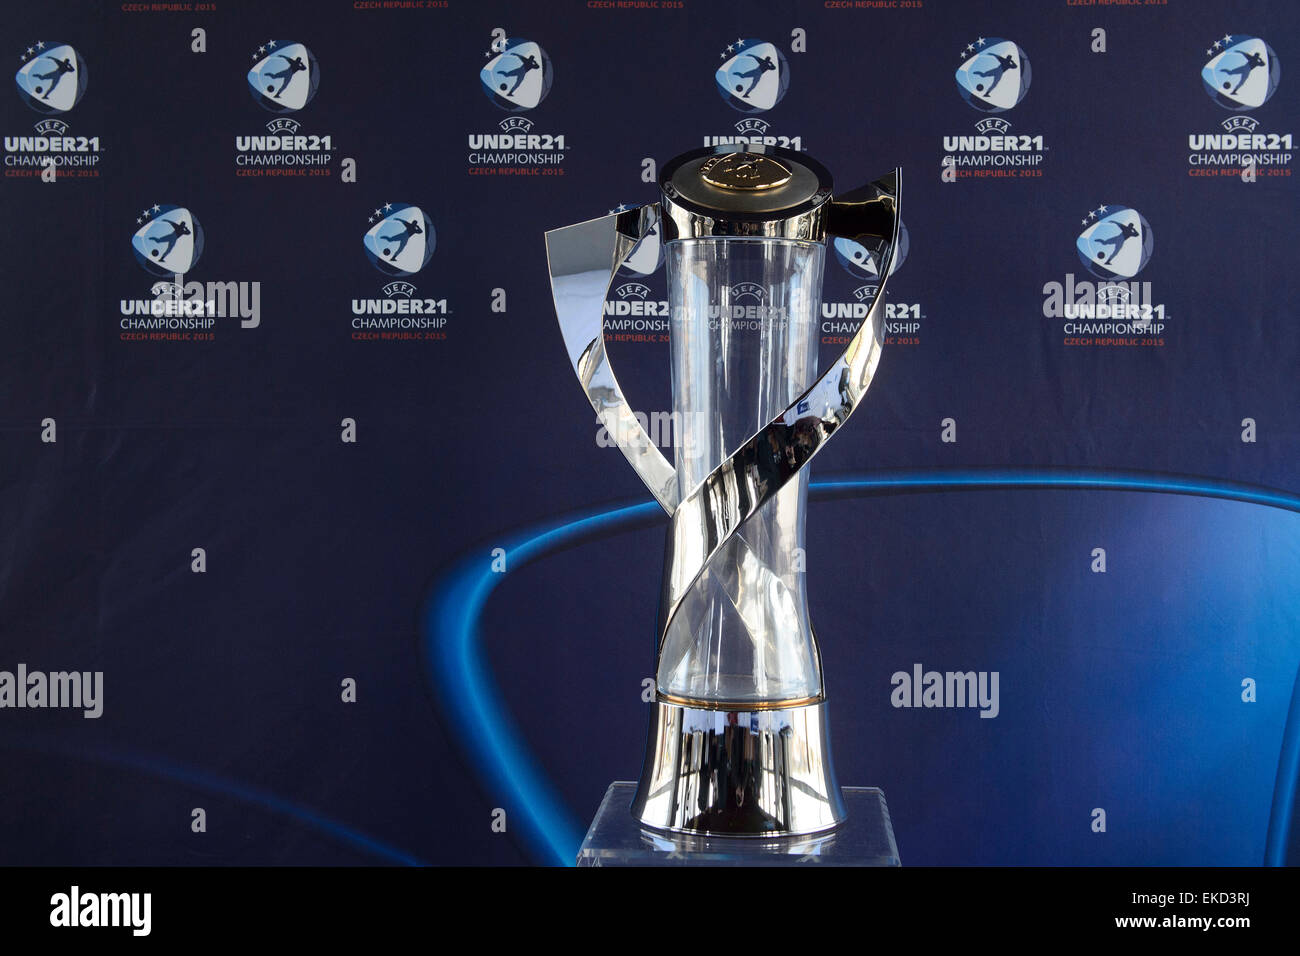 Uefa Europa Conference League Trophy - Uefa Trophy Display Event Stock